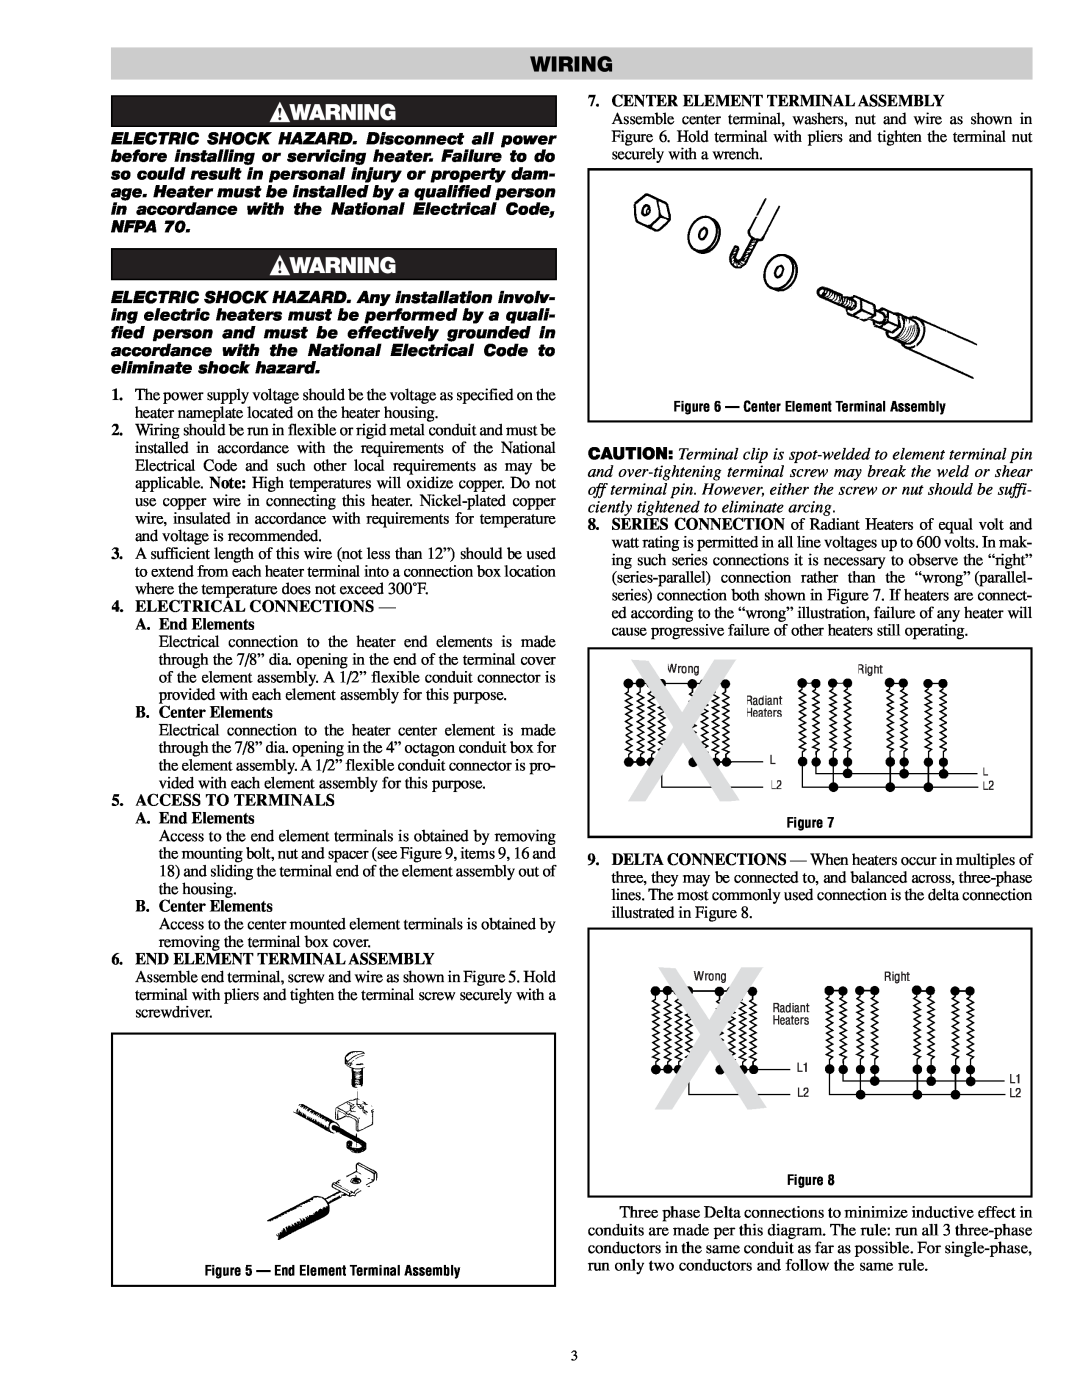 Chromalox DU-RAD-458 6.04 757 specifications Wiring, ELECTRICAL CONNECTIONS - A.End Elements, B.Center Elements 